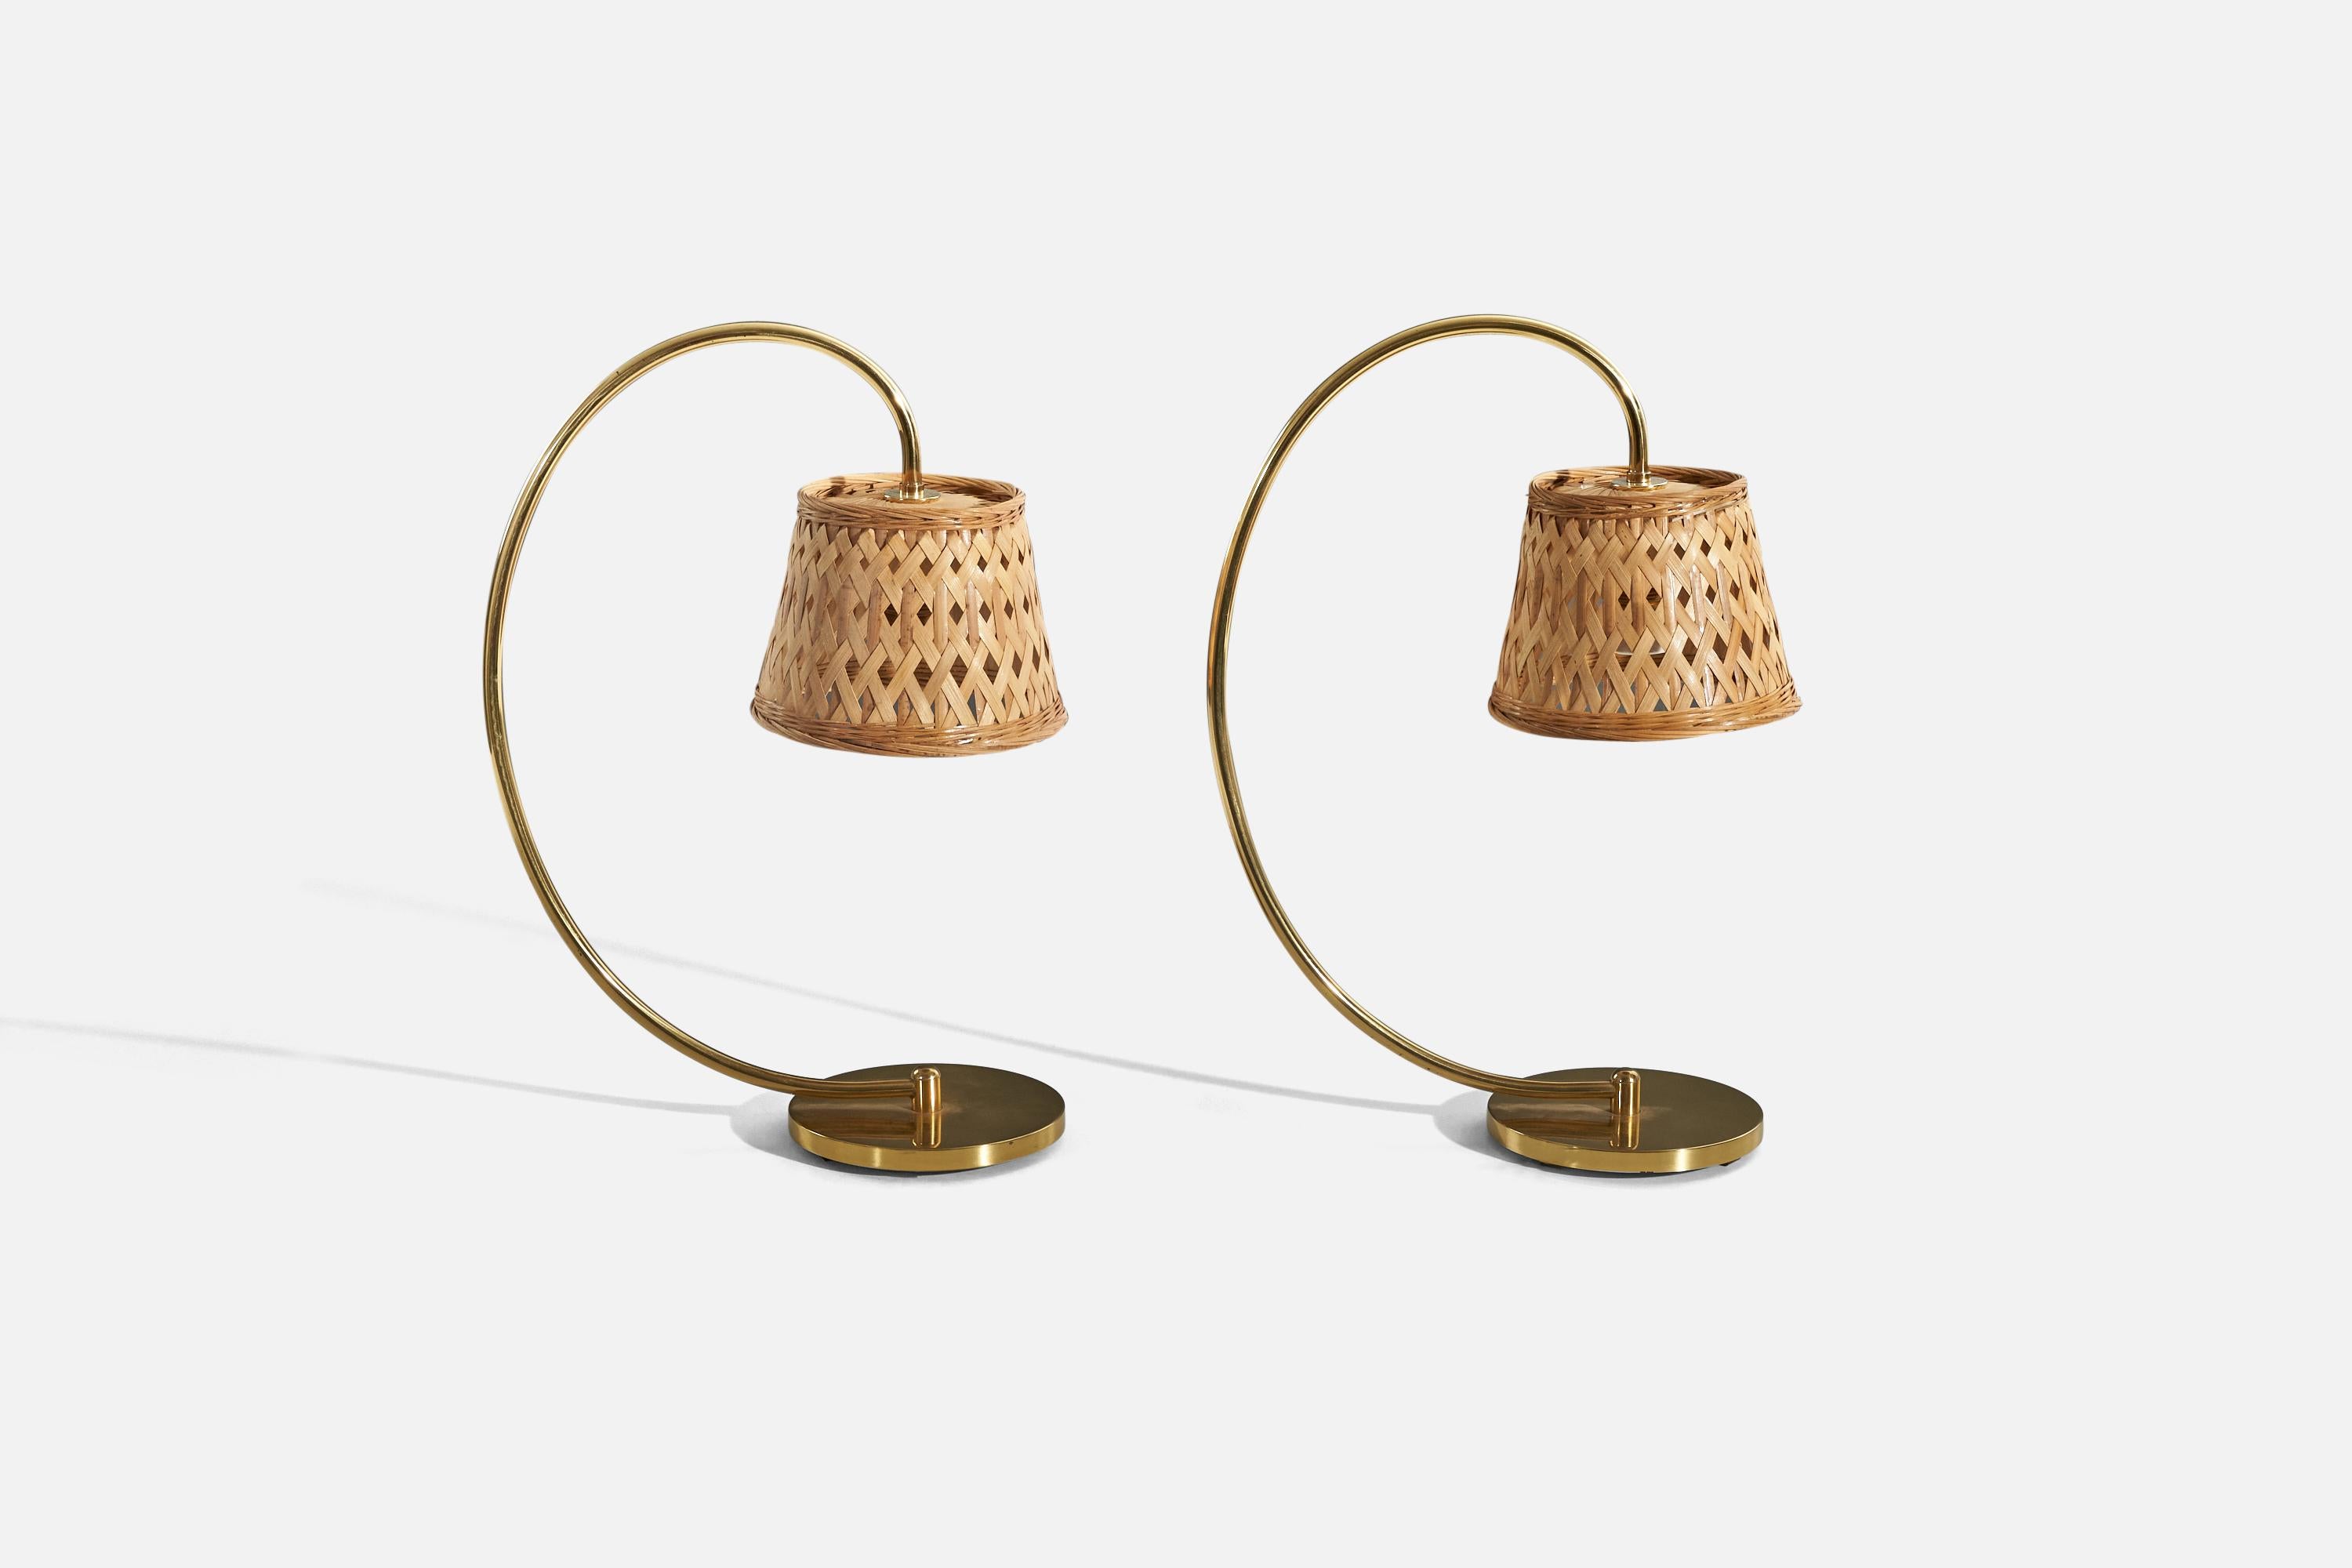 A pair of brass and rattan table lamps designed and produced in Italy, 1950s.

Sold with Lampshade. 
Stated dimensions refer to the Lamp with the Shade.